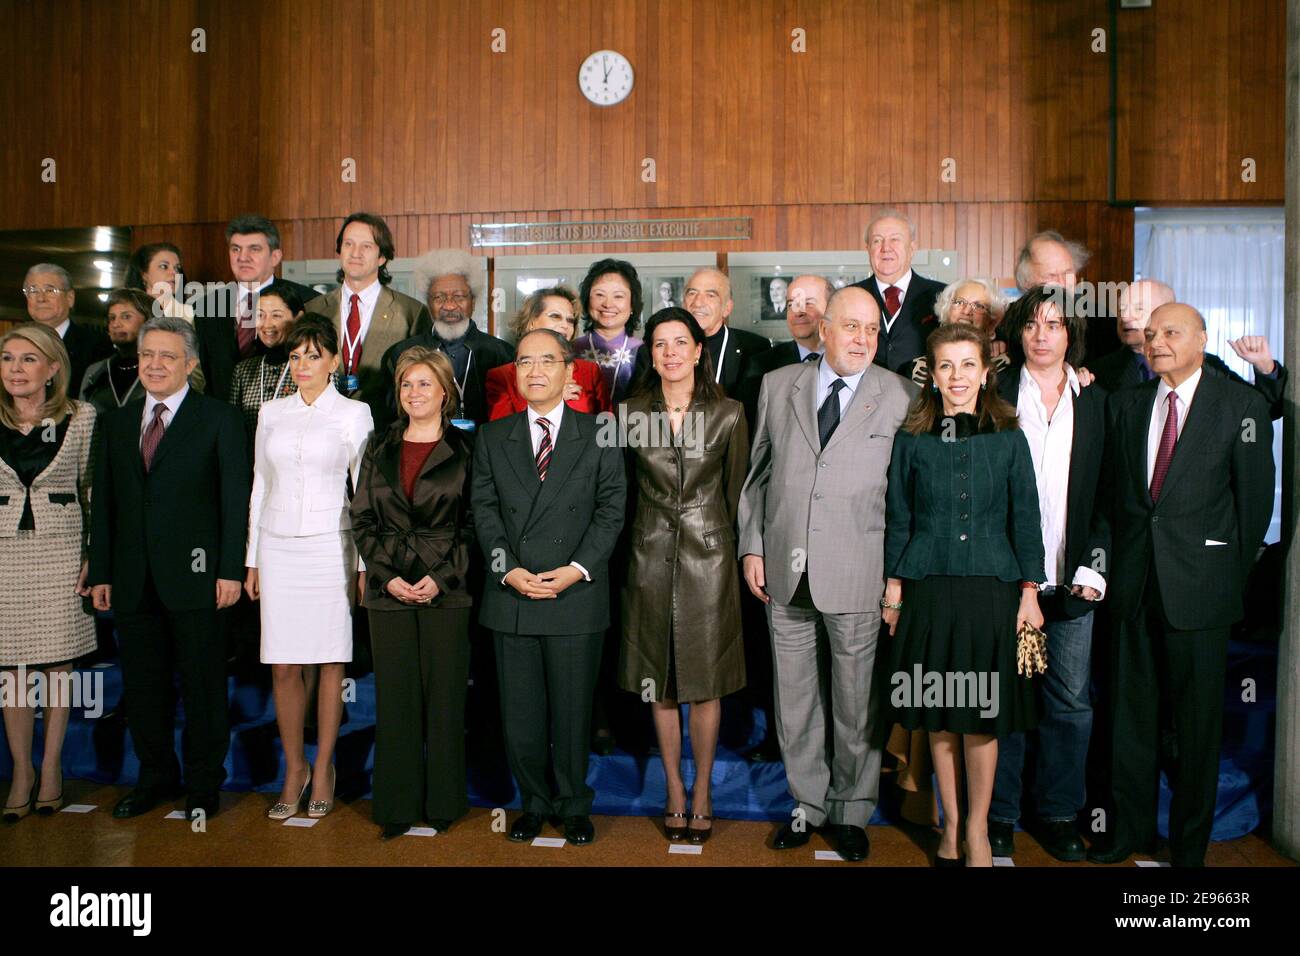 UNESCO's Goodwill Ambassadors with Princess Caroline of Monaco attend the annual reunion, marked by the celebration of the Organization's 60th Anniversary and held at UNESCO headquarters in Paris, France on March 15, 2006. Photo by Thierry Orban/ABACAPRESS.COM Stock Photo